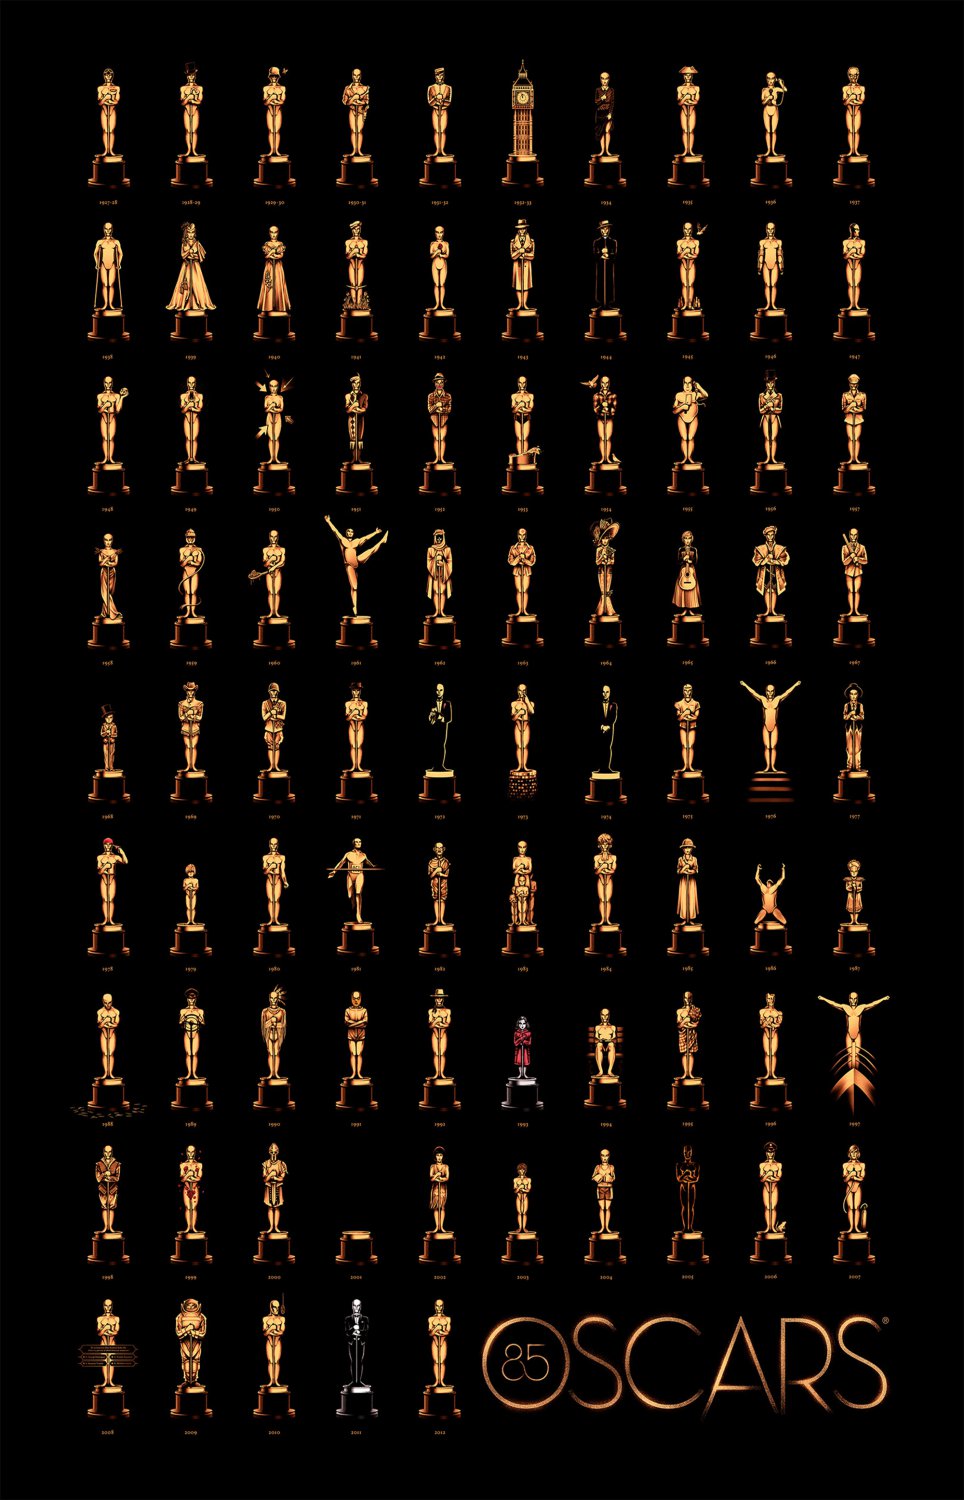 Oscars through 85 years Infographic Chart 18"x28" (45cm/70cm) Poster